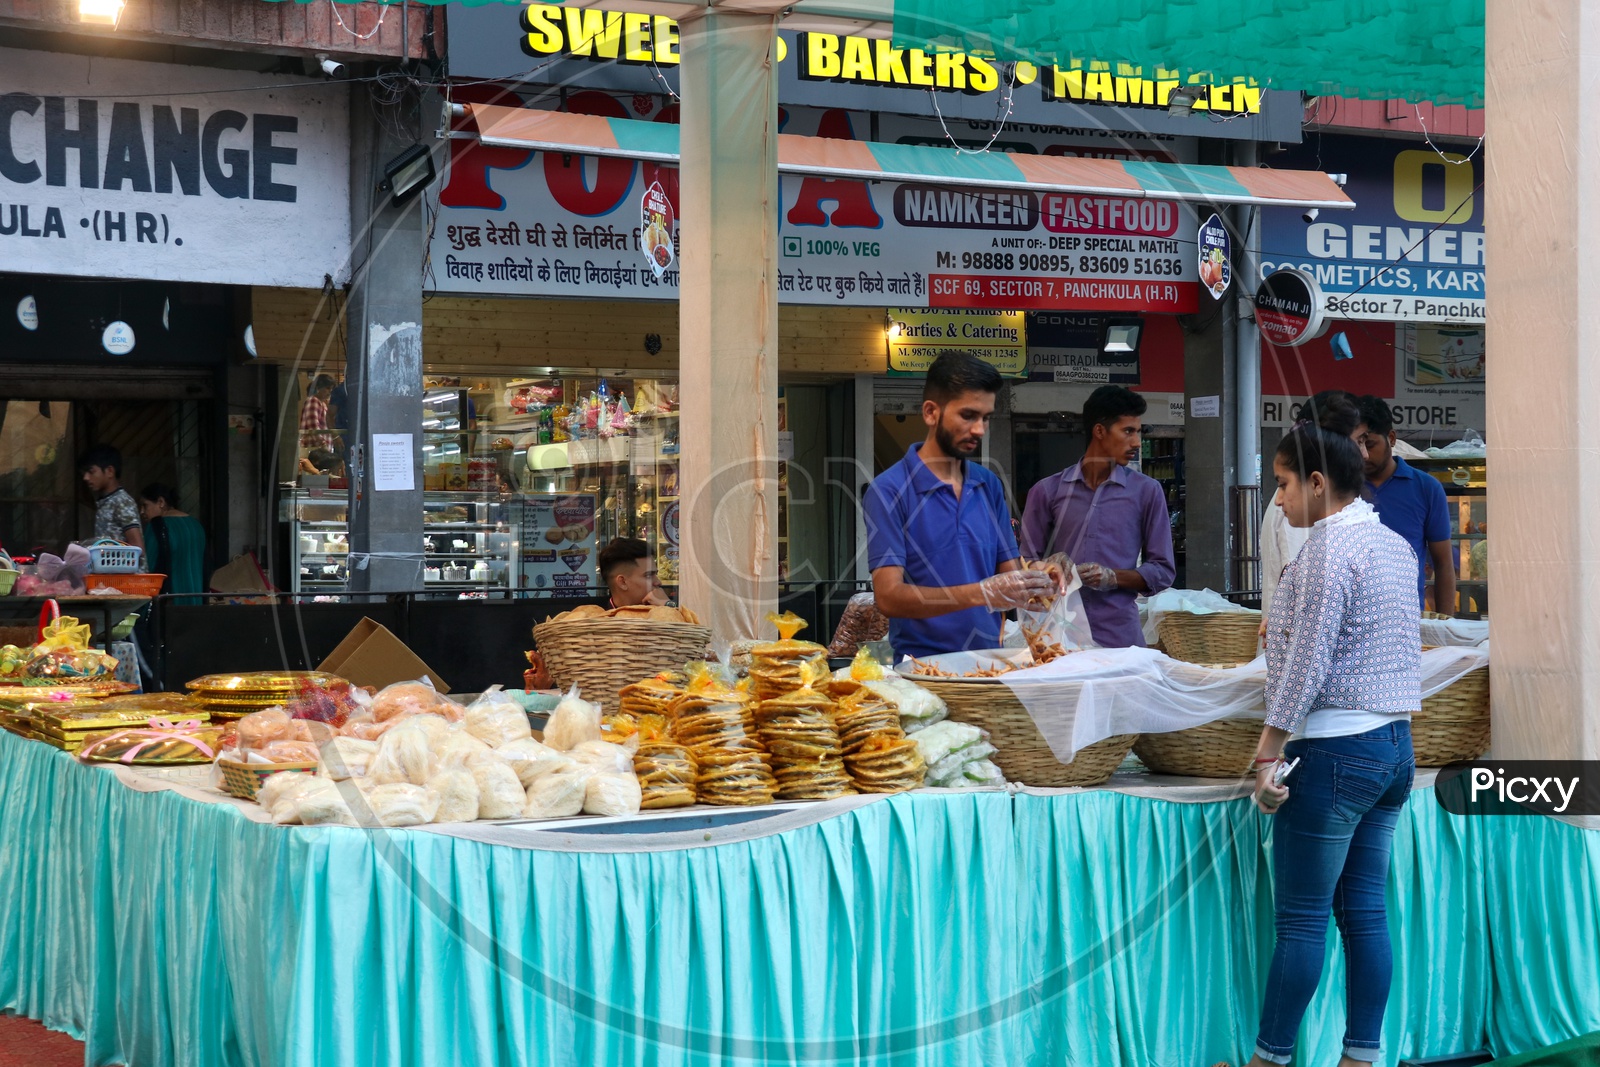 A vendor selling sweet and confectionories at a stall